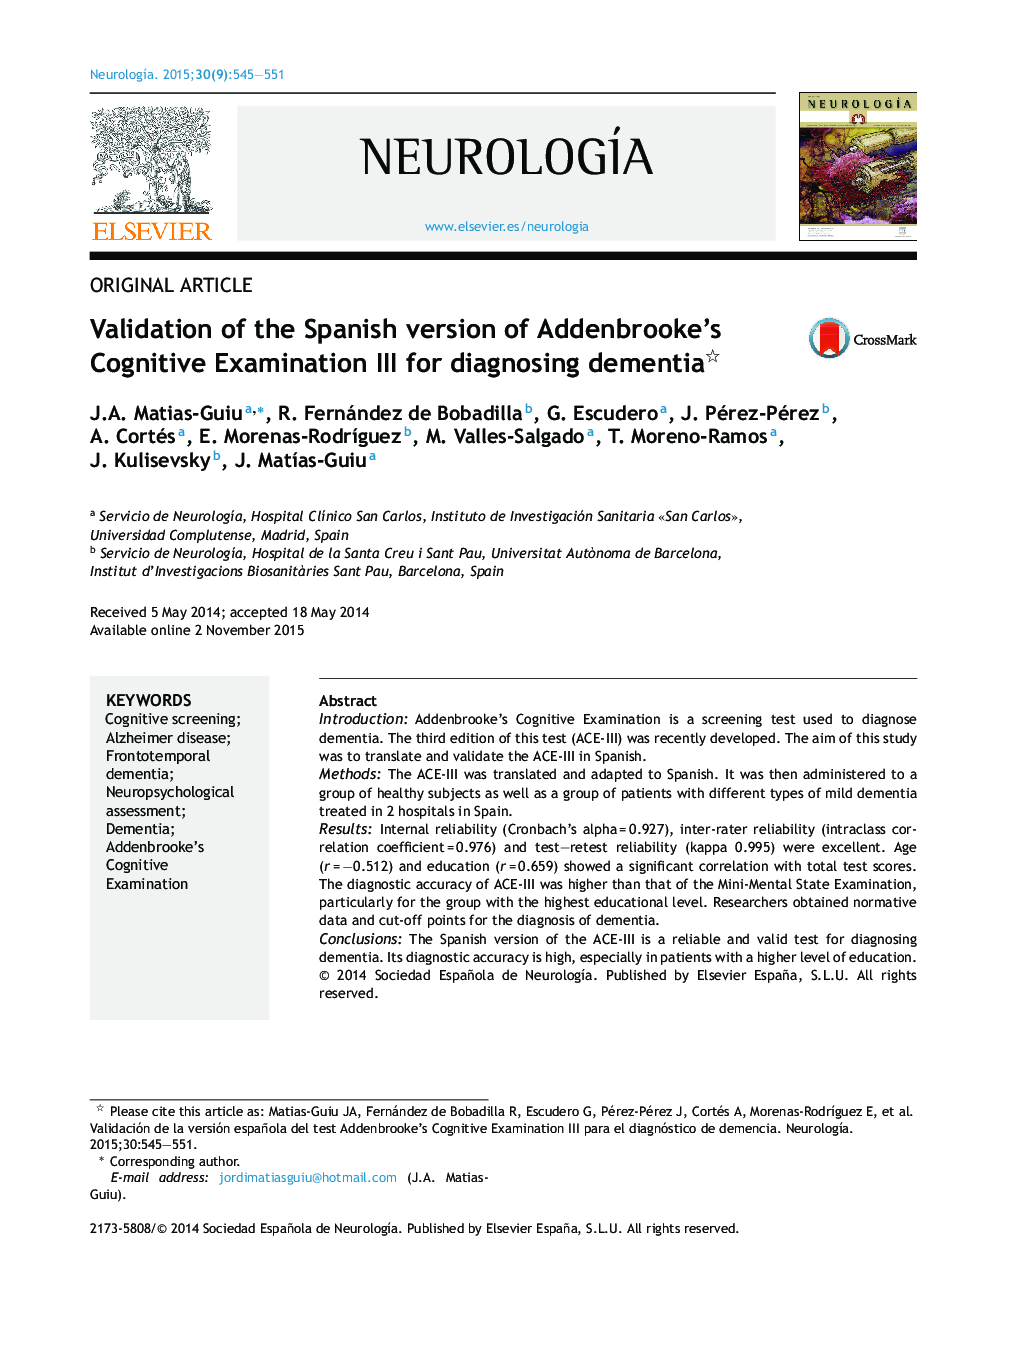 Validation of the Spanish version of Addenbrooke's Cognitive Examination III for diagnosing dementia 